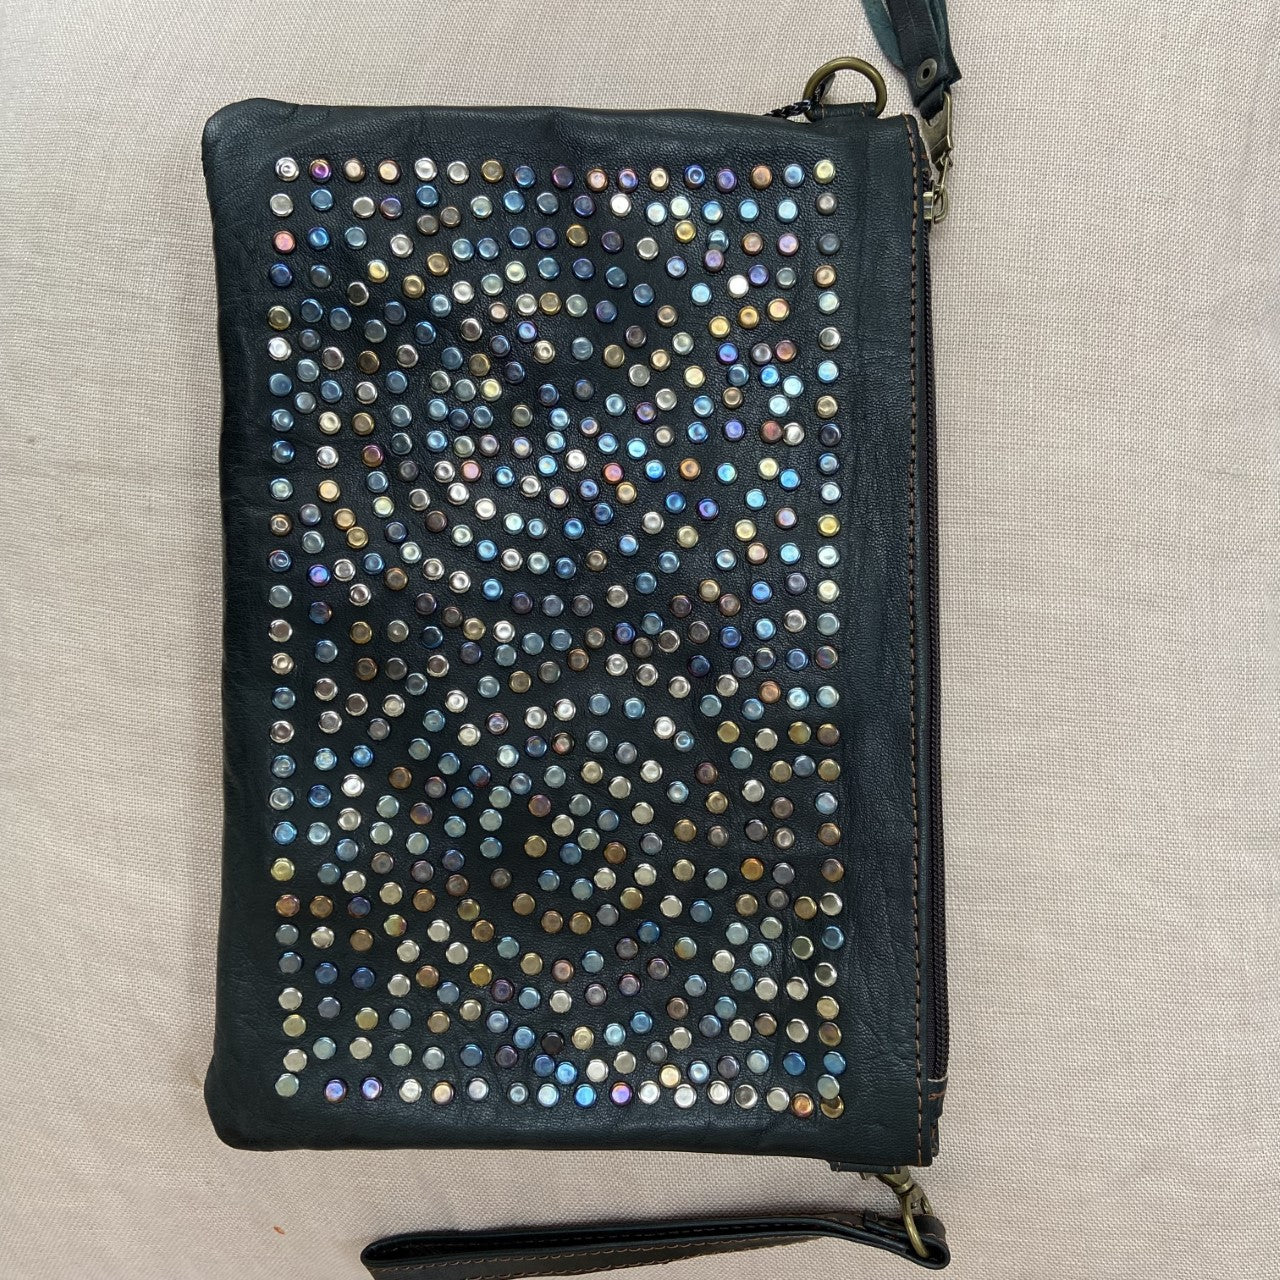 The Studded Leather Clutch